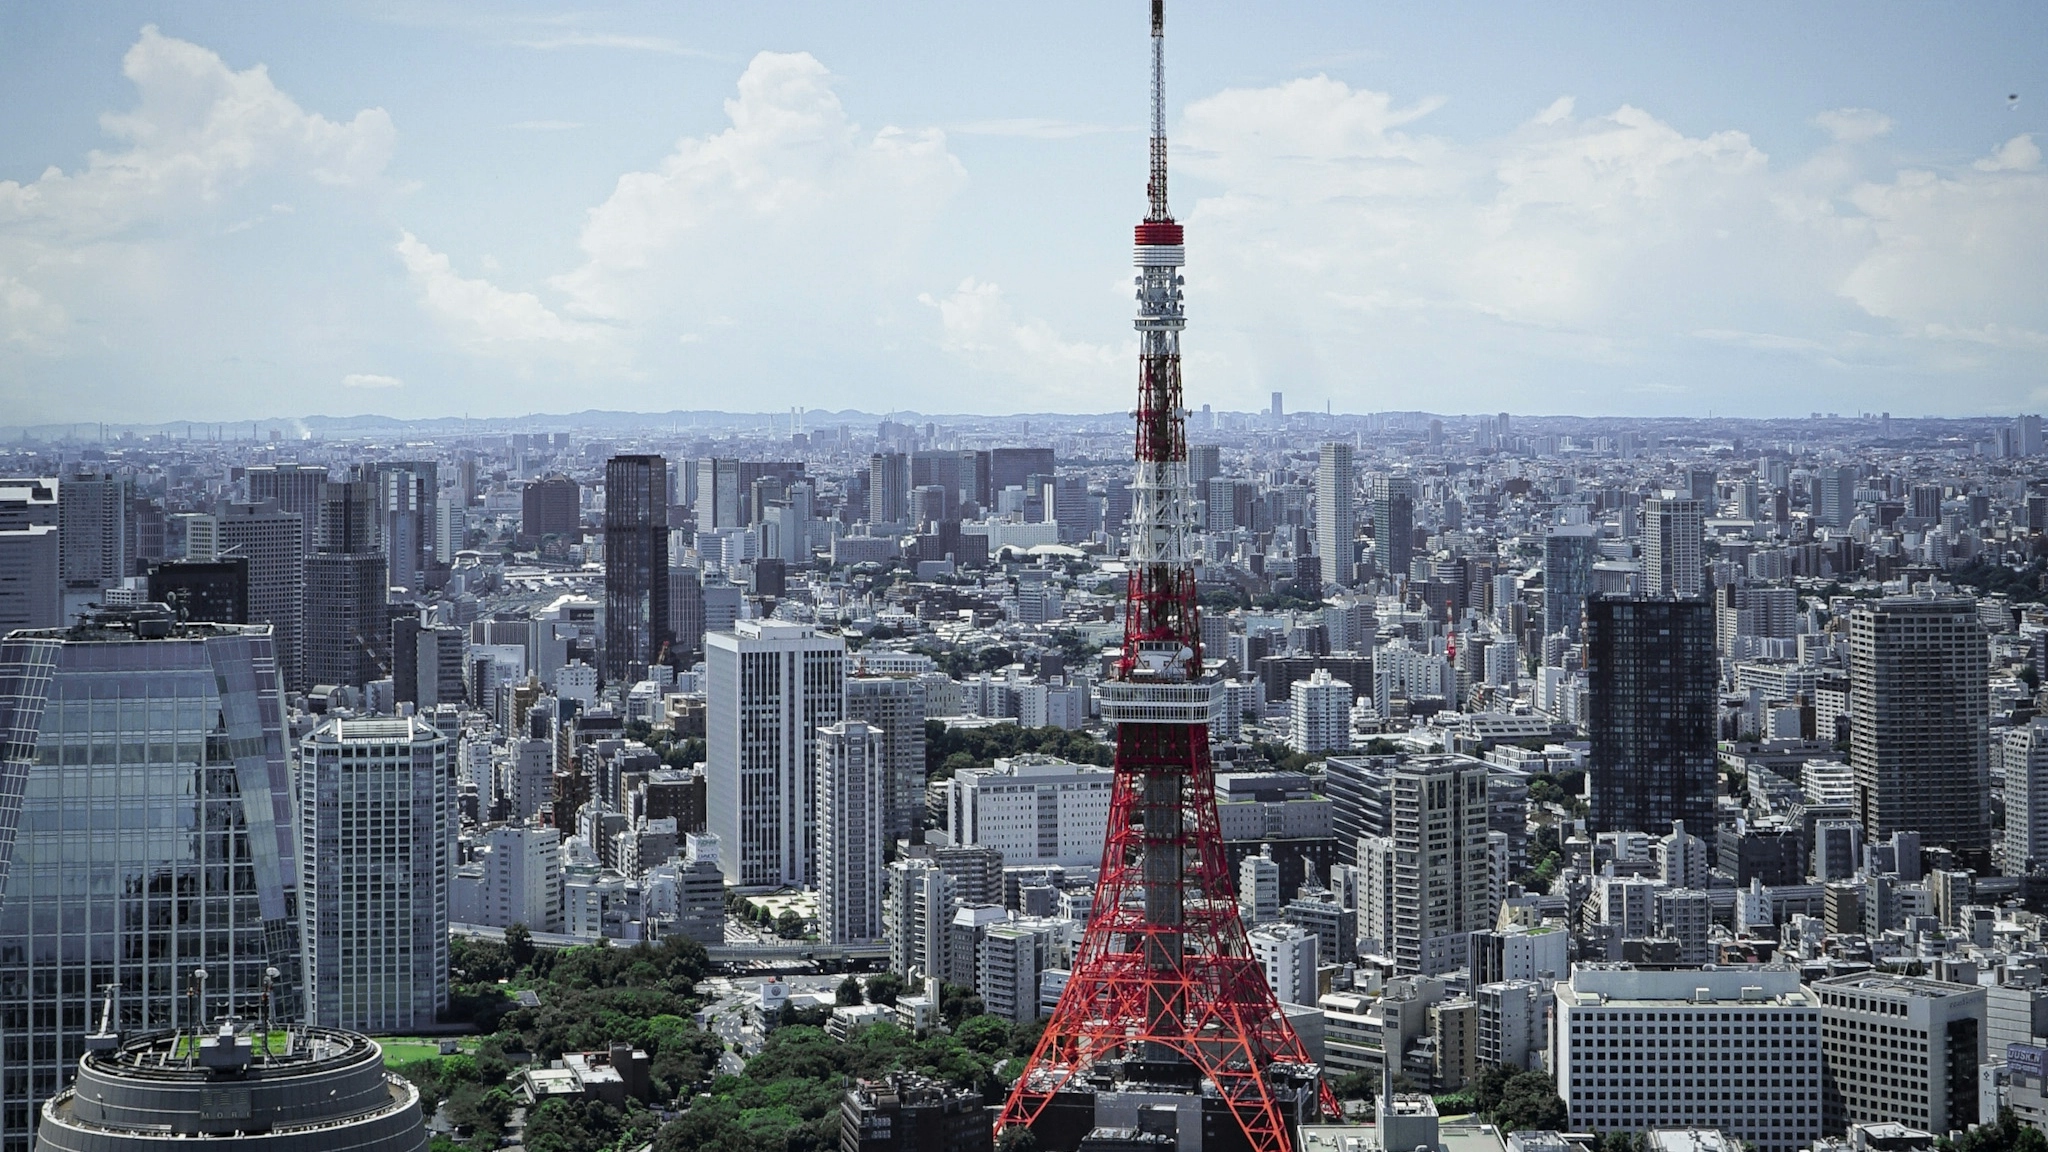 Tokyo Tower rises from the concrete jungle of the city